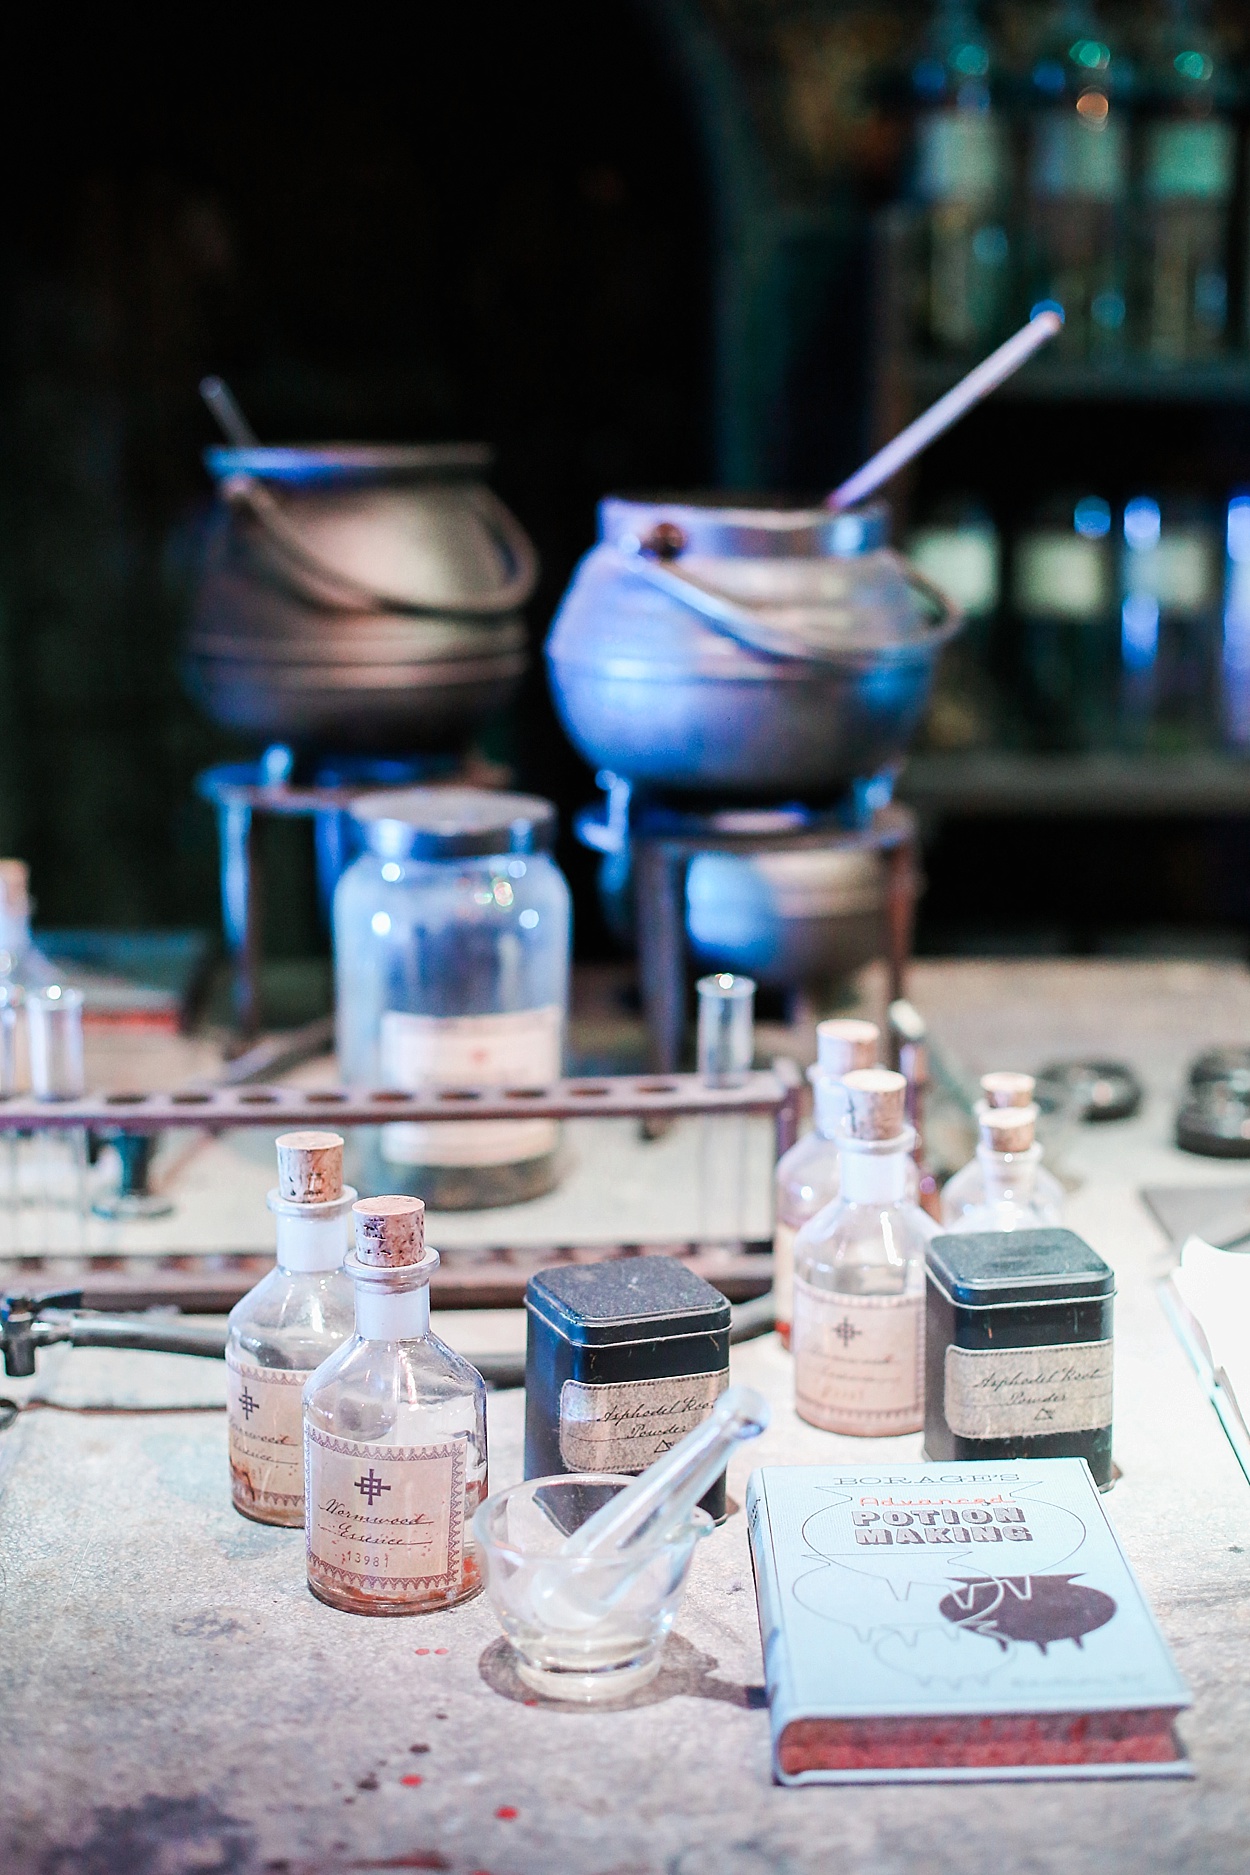 Harry Potter studio tour in London, England | Abby Grace Photography